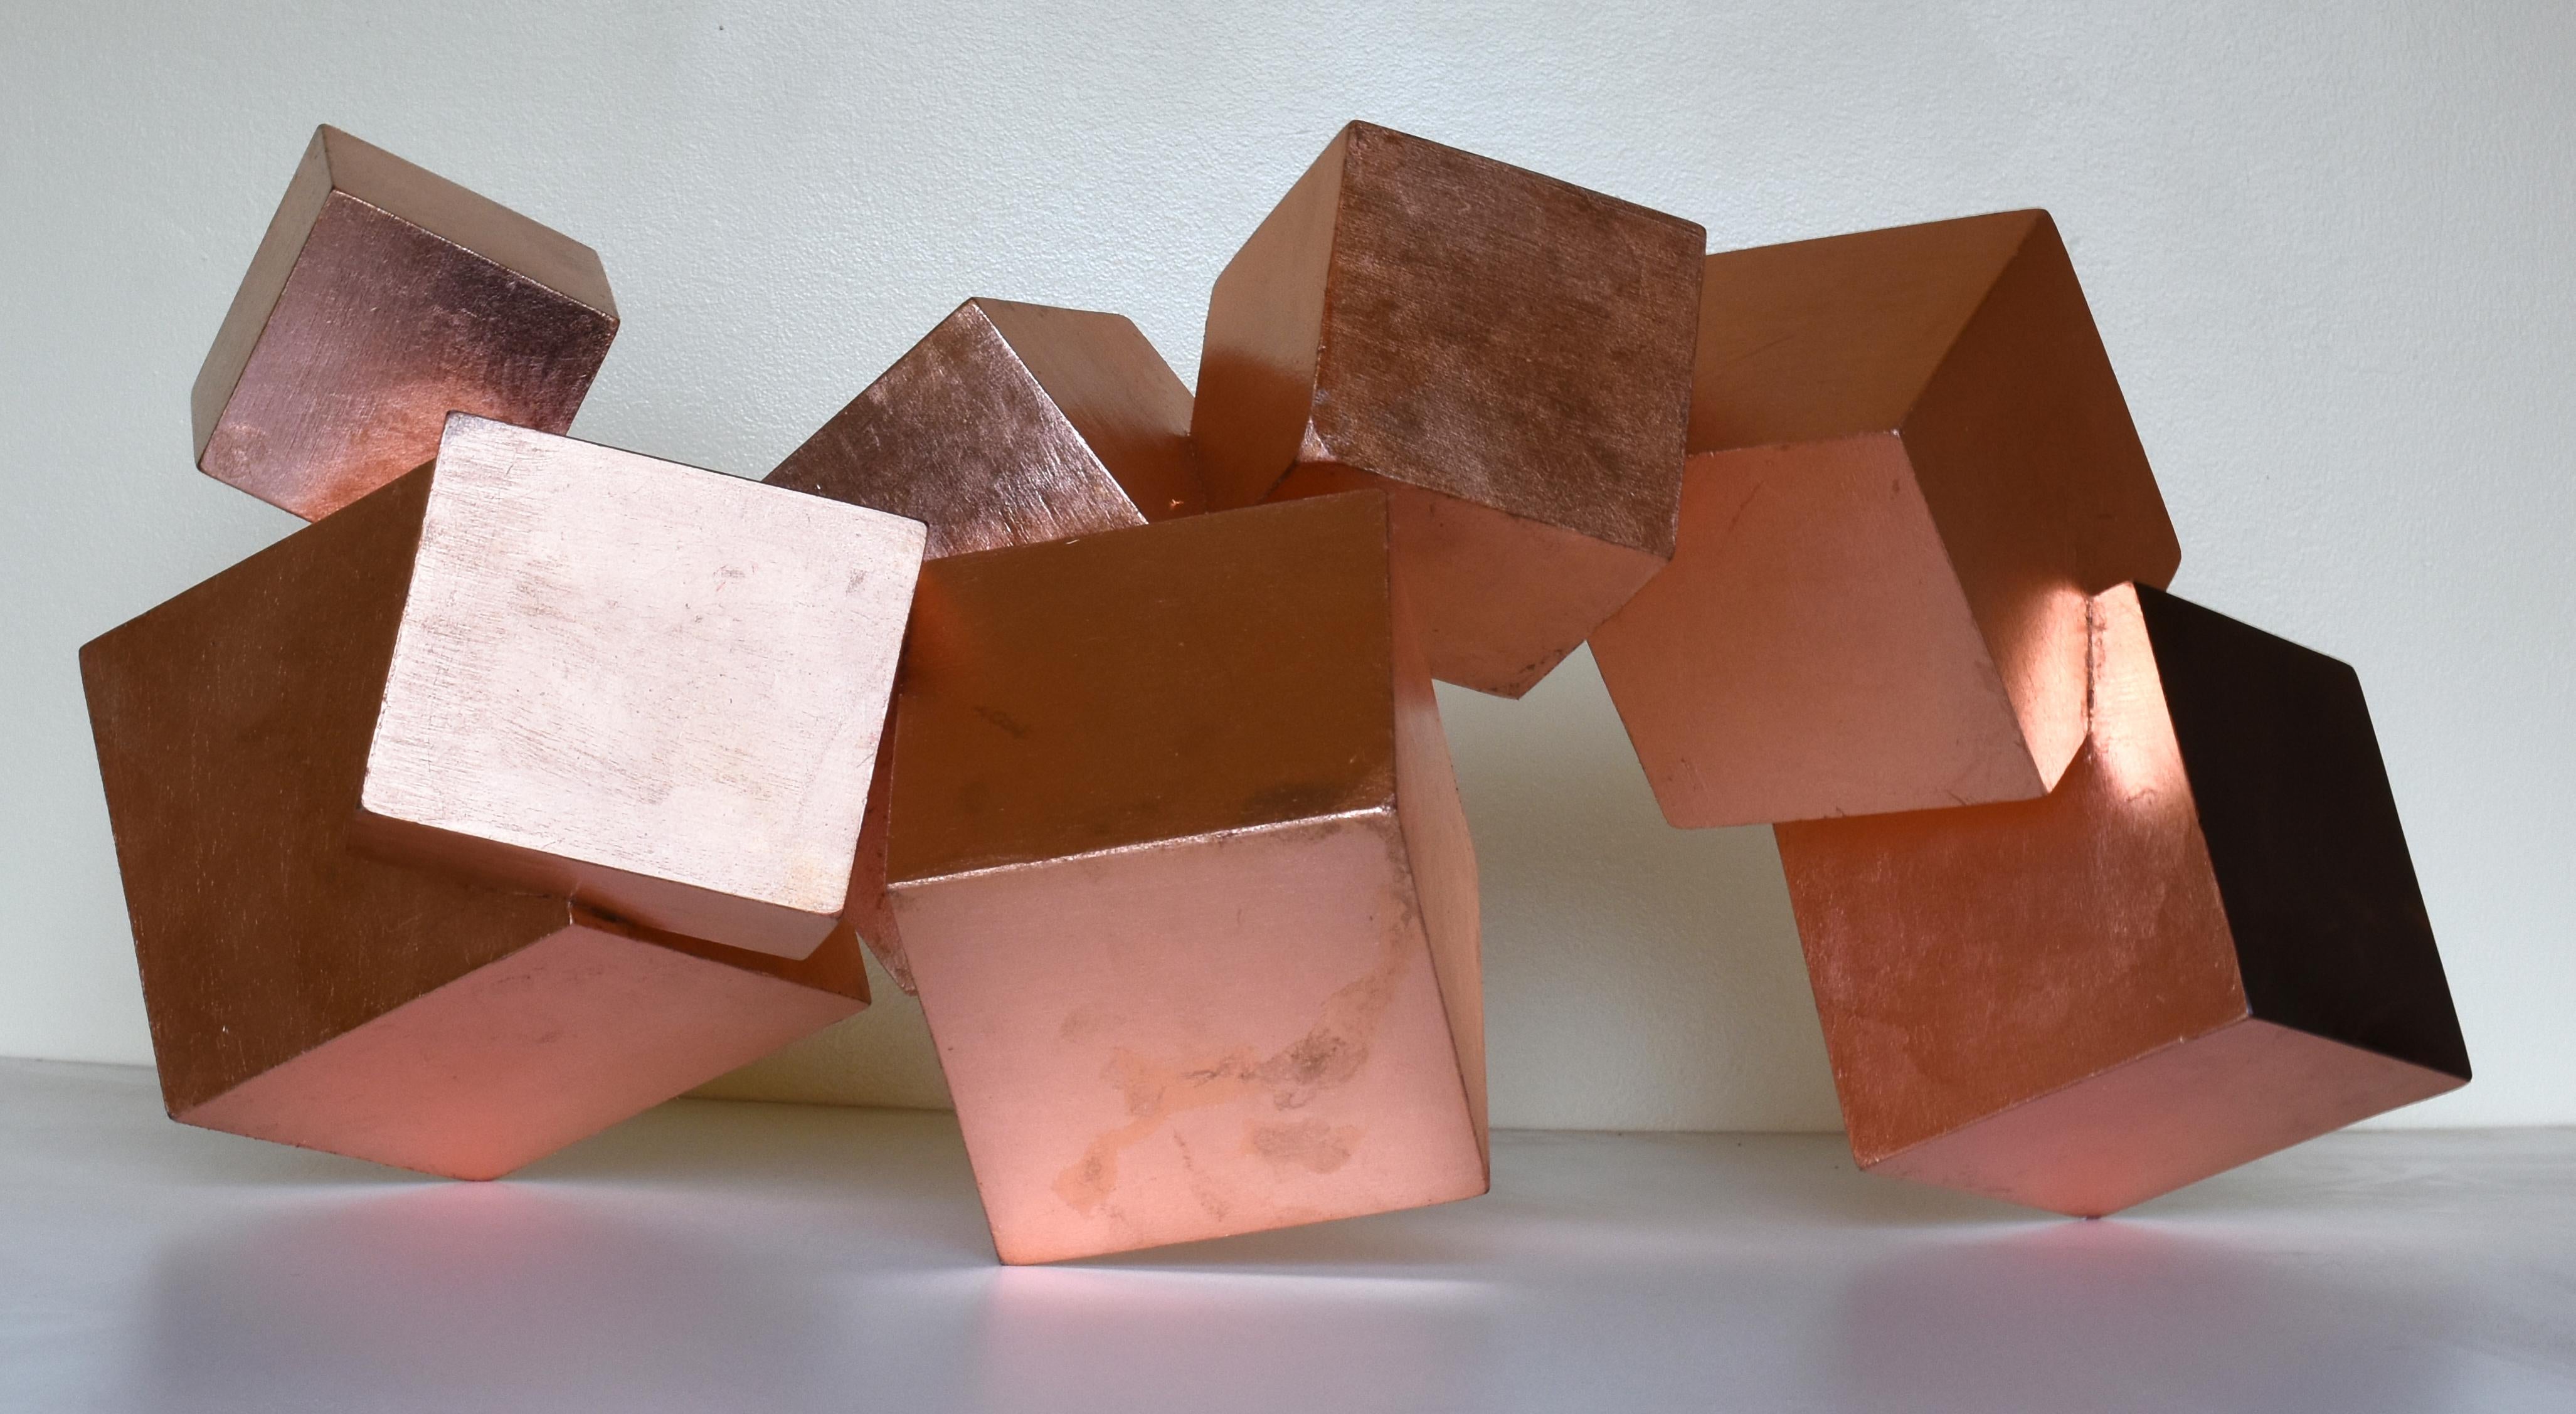 Copper and Mahogany Pyrite (exotic wood, metallic, cubic, table top sculpture) - Abstract Geometric Sculpture by Chloe Hedden